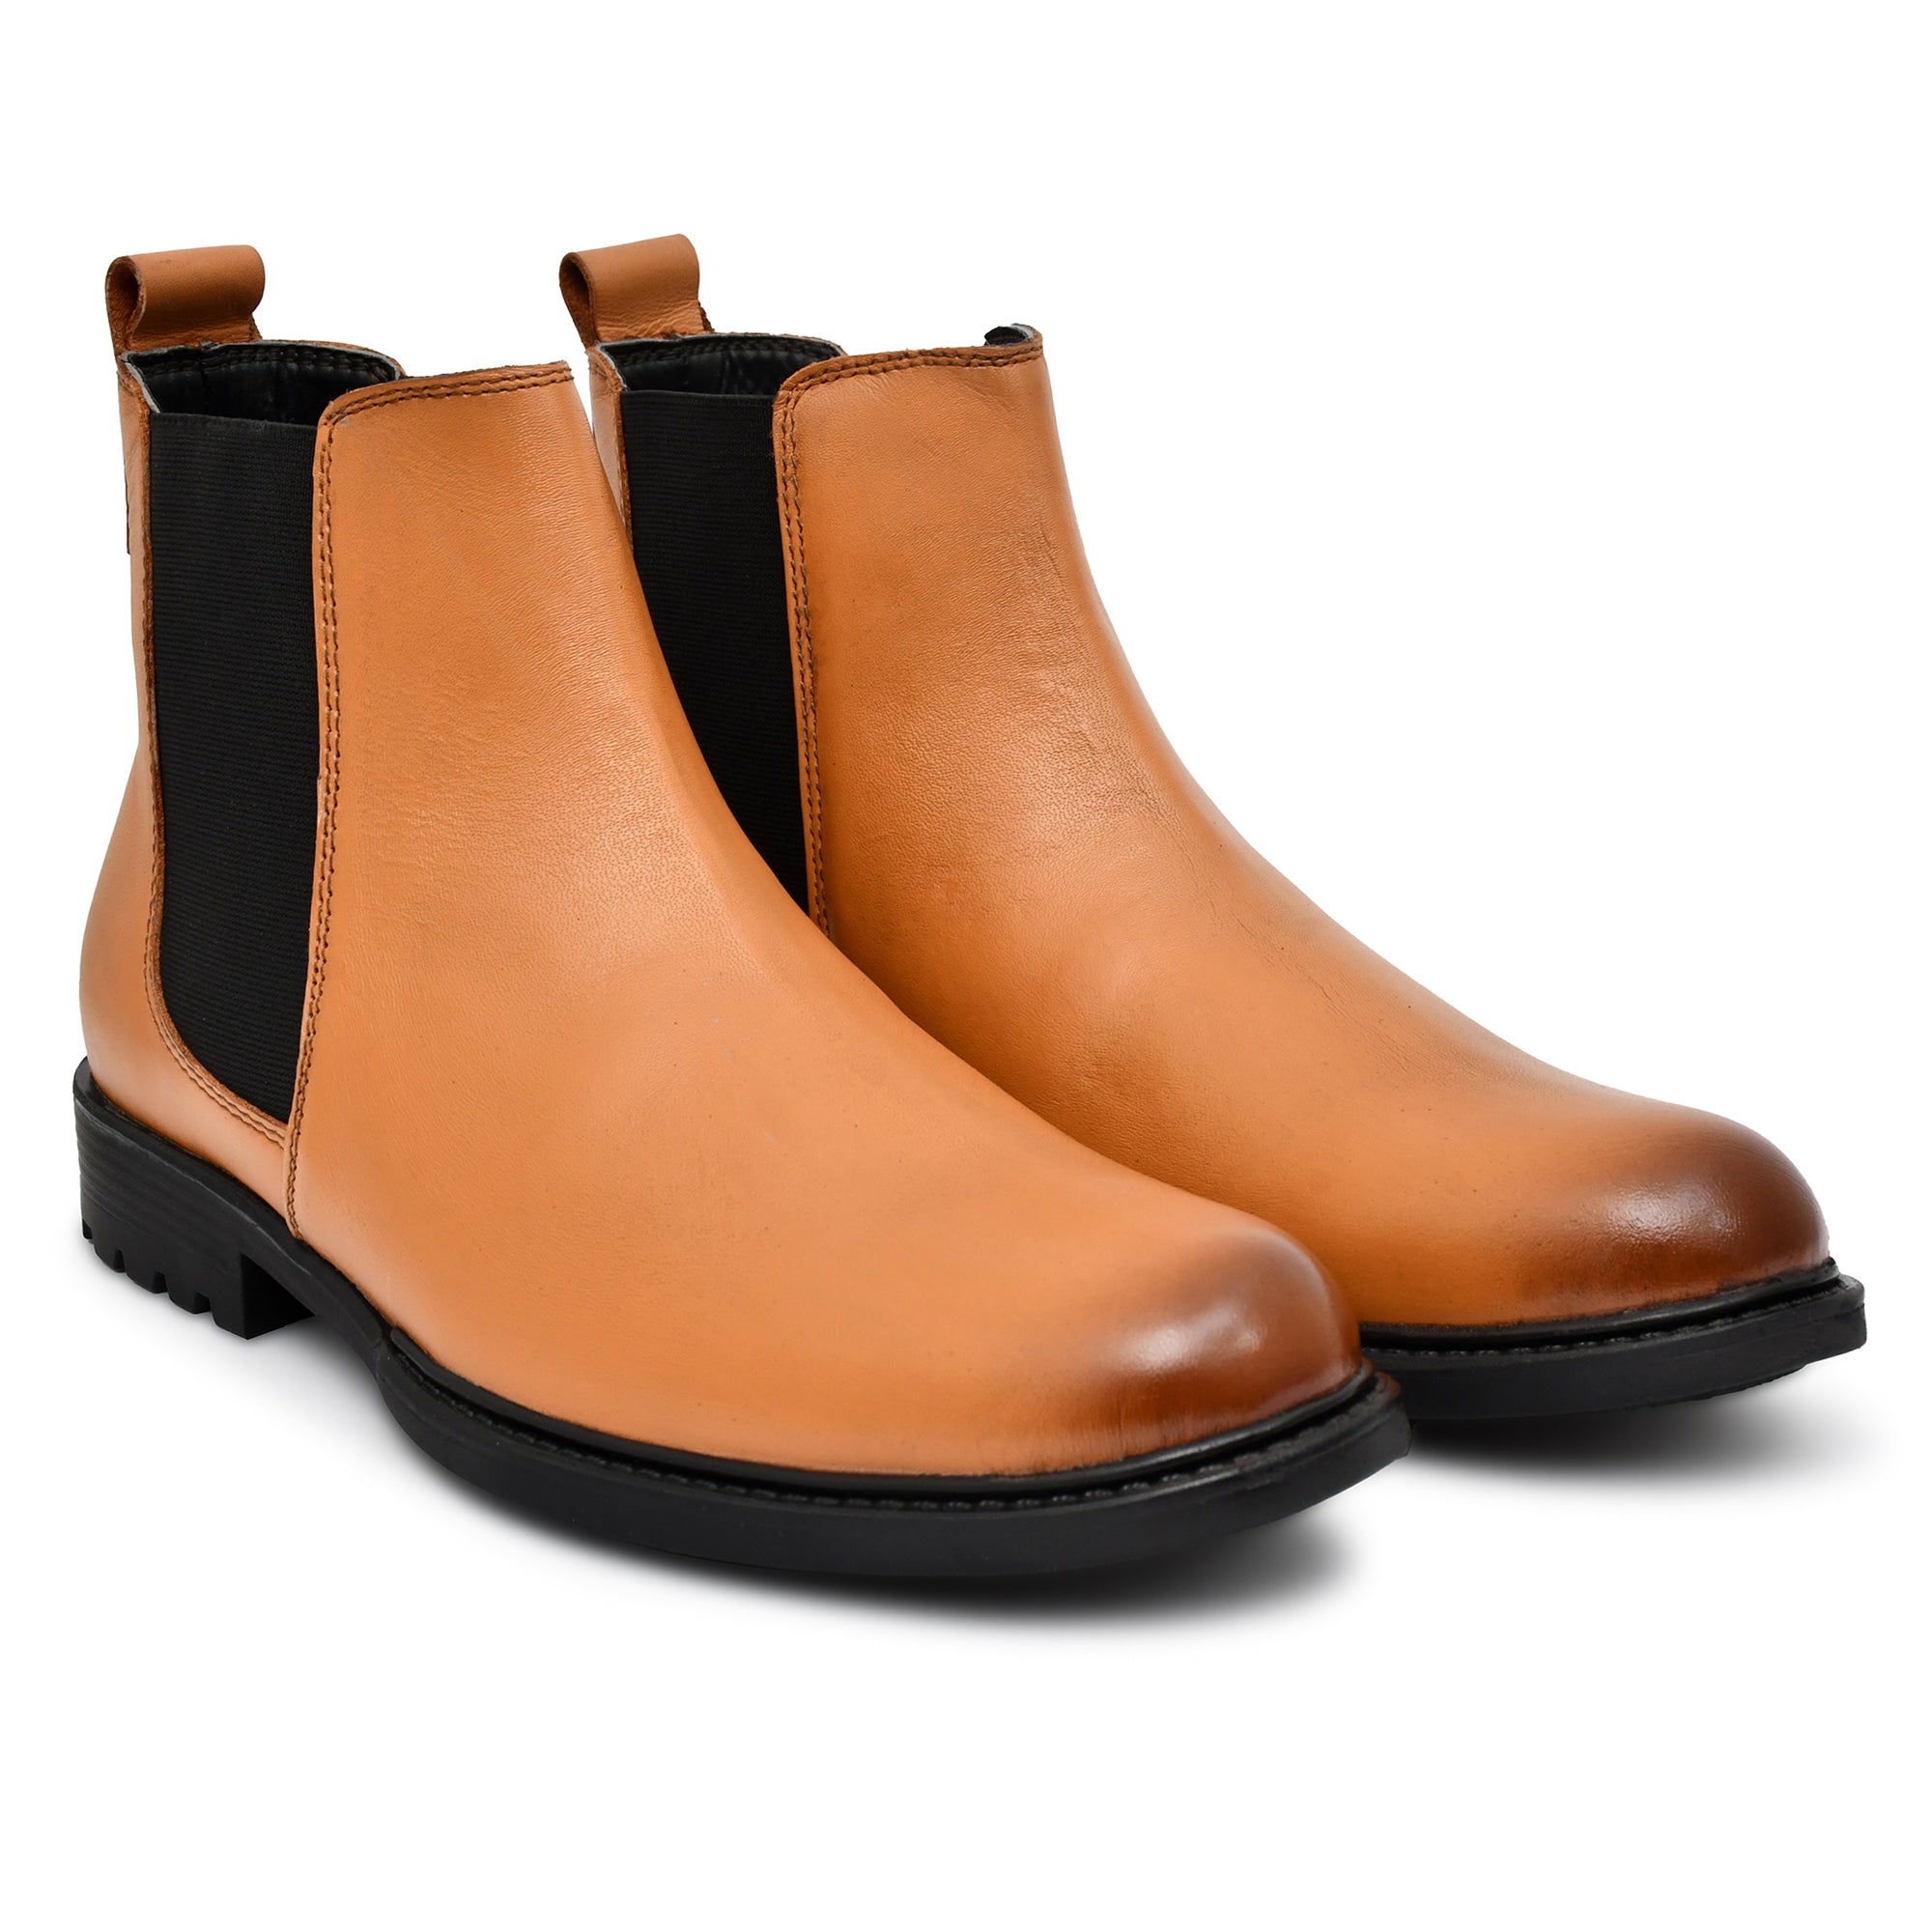 Leather Boots for men's